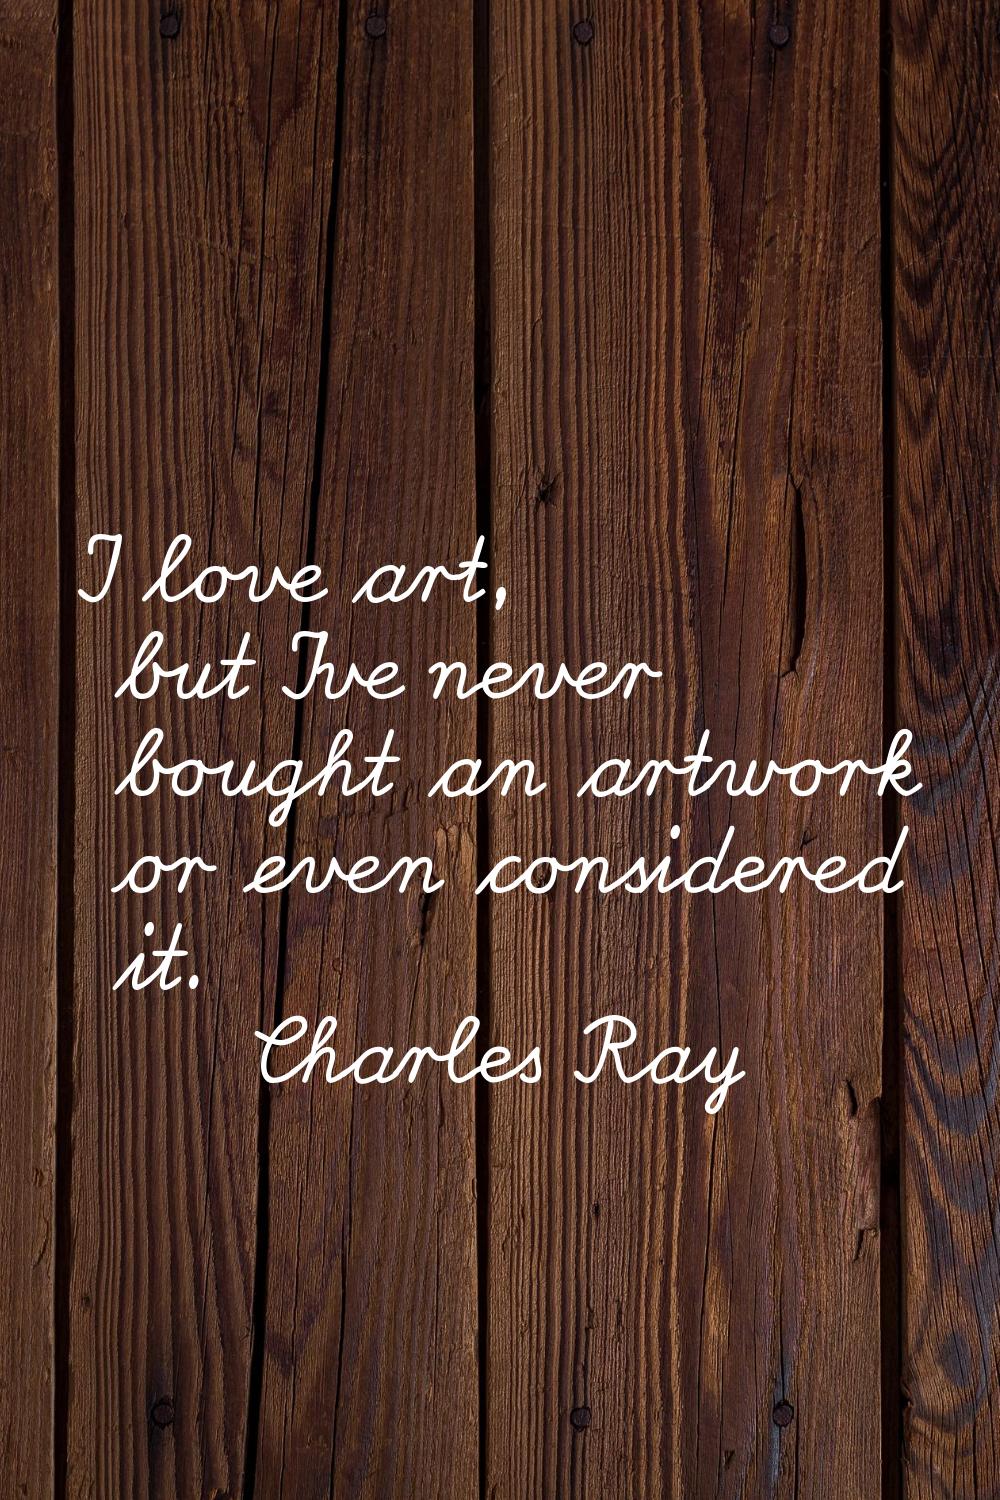 I love art, but I've never bought an artwork or even considered it.